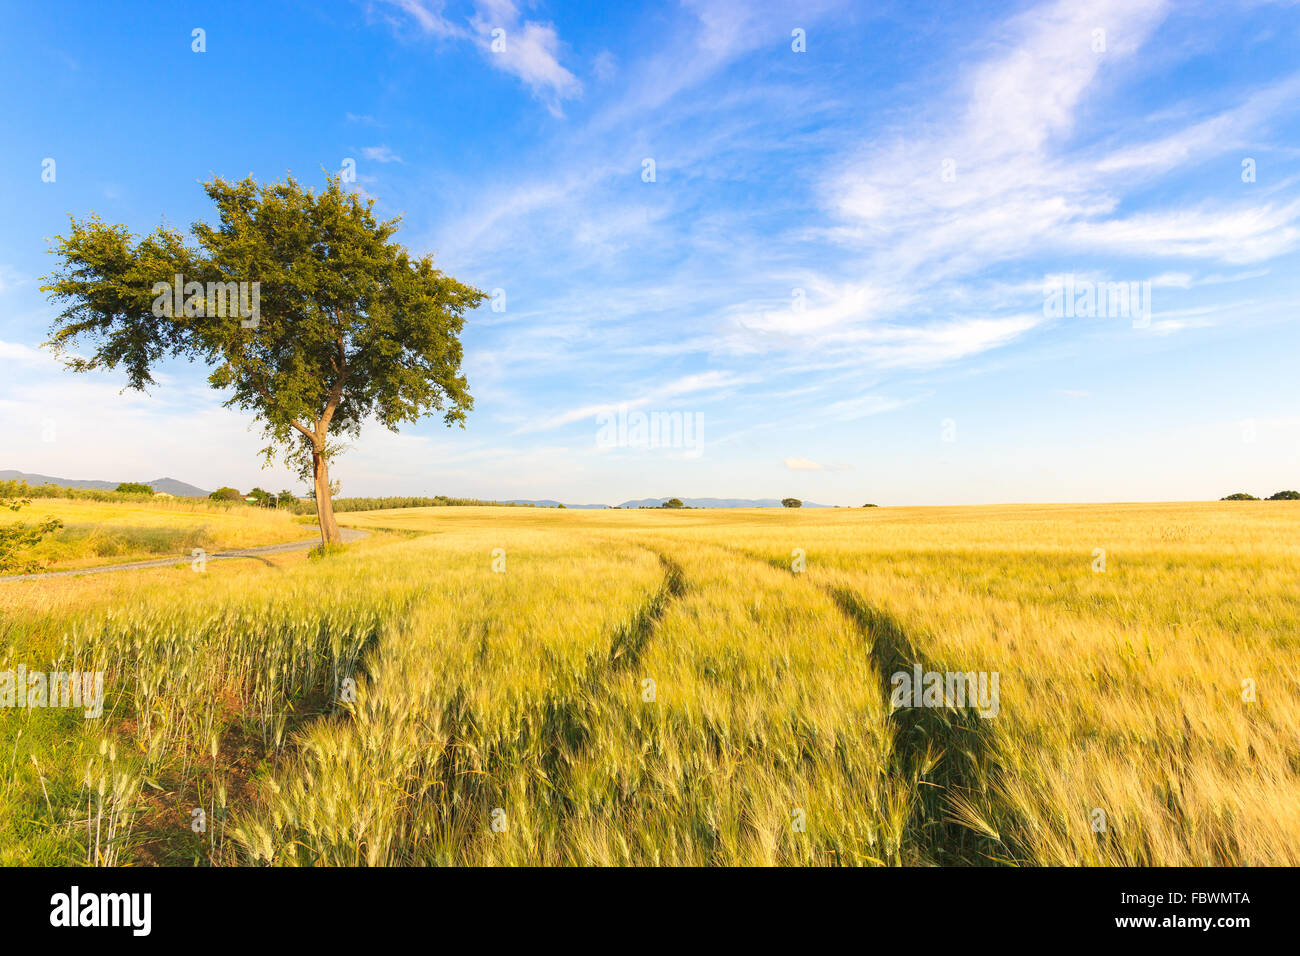 A wheat filed with two curve tracks and a tree in a spring day. On the horizon a natural clear sky. Tuscany, Italy. Stock Photo